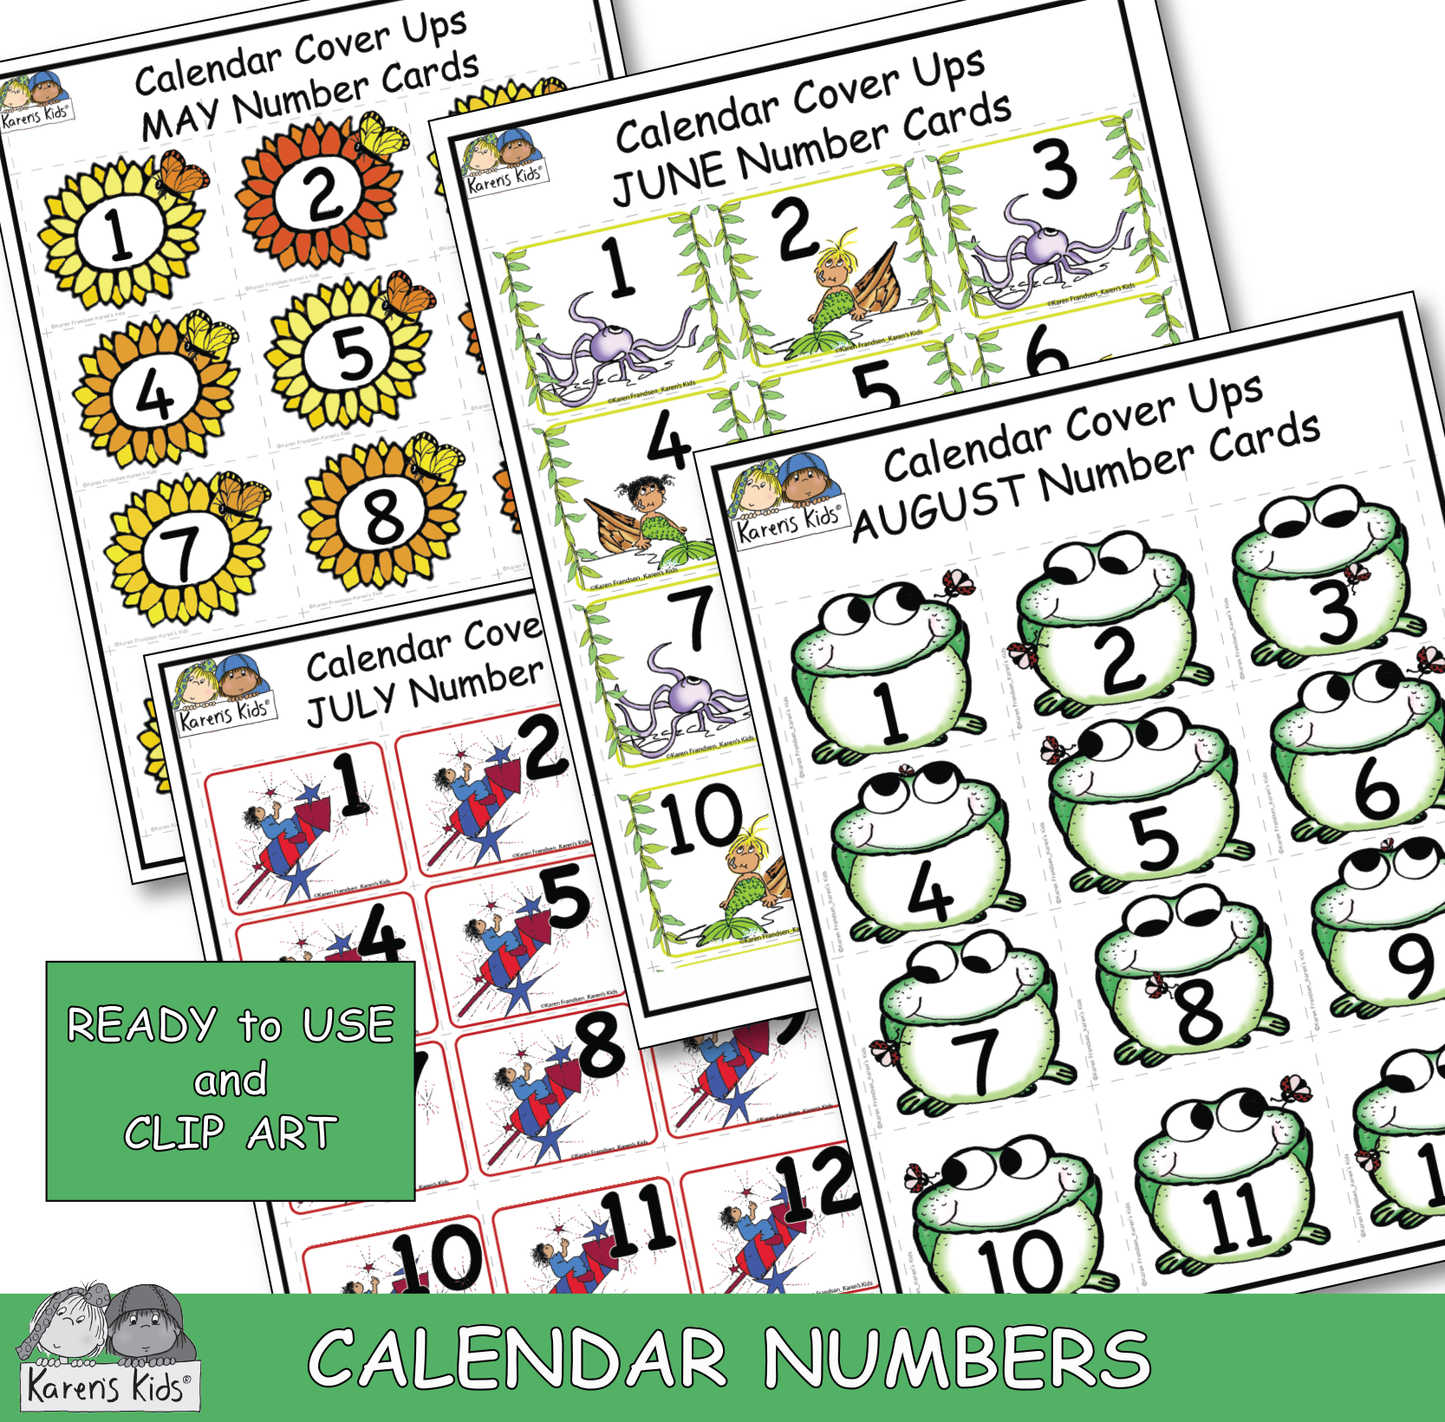 Calendar number card samples for May, June, July, August. Clip art and Ready to Use.